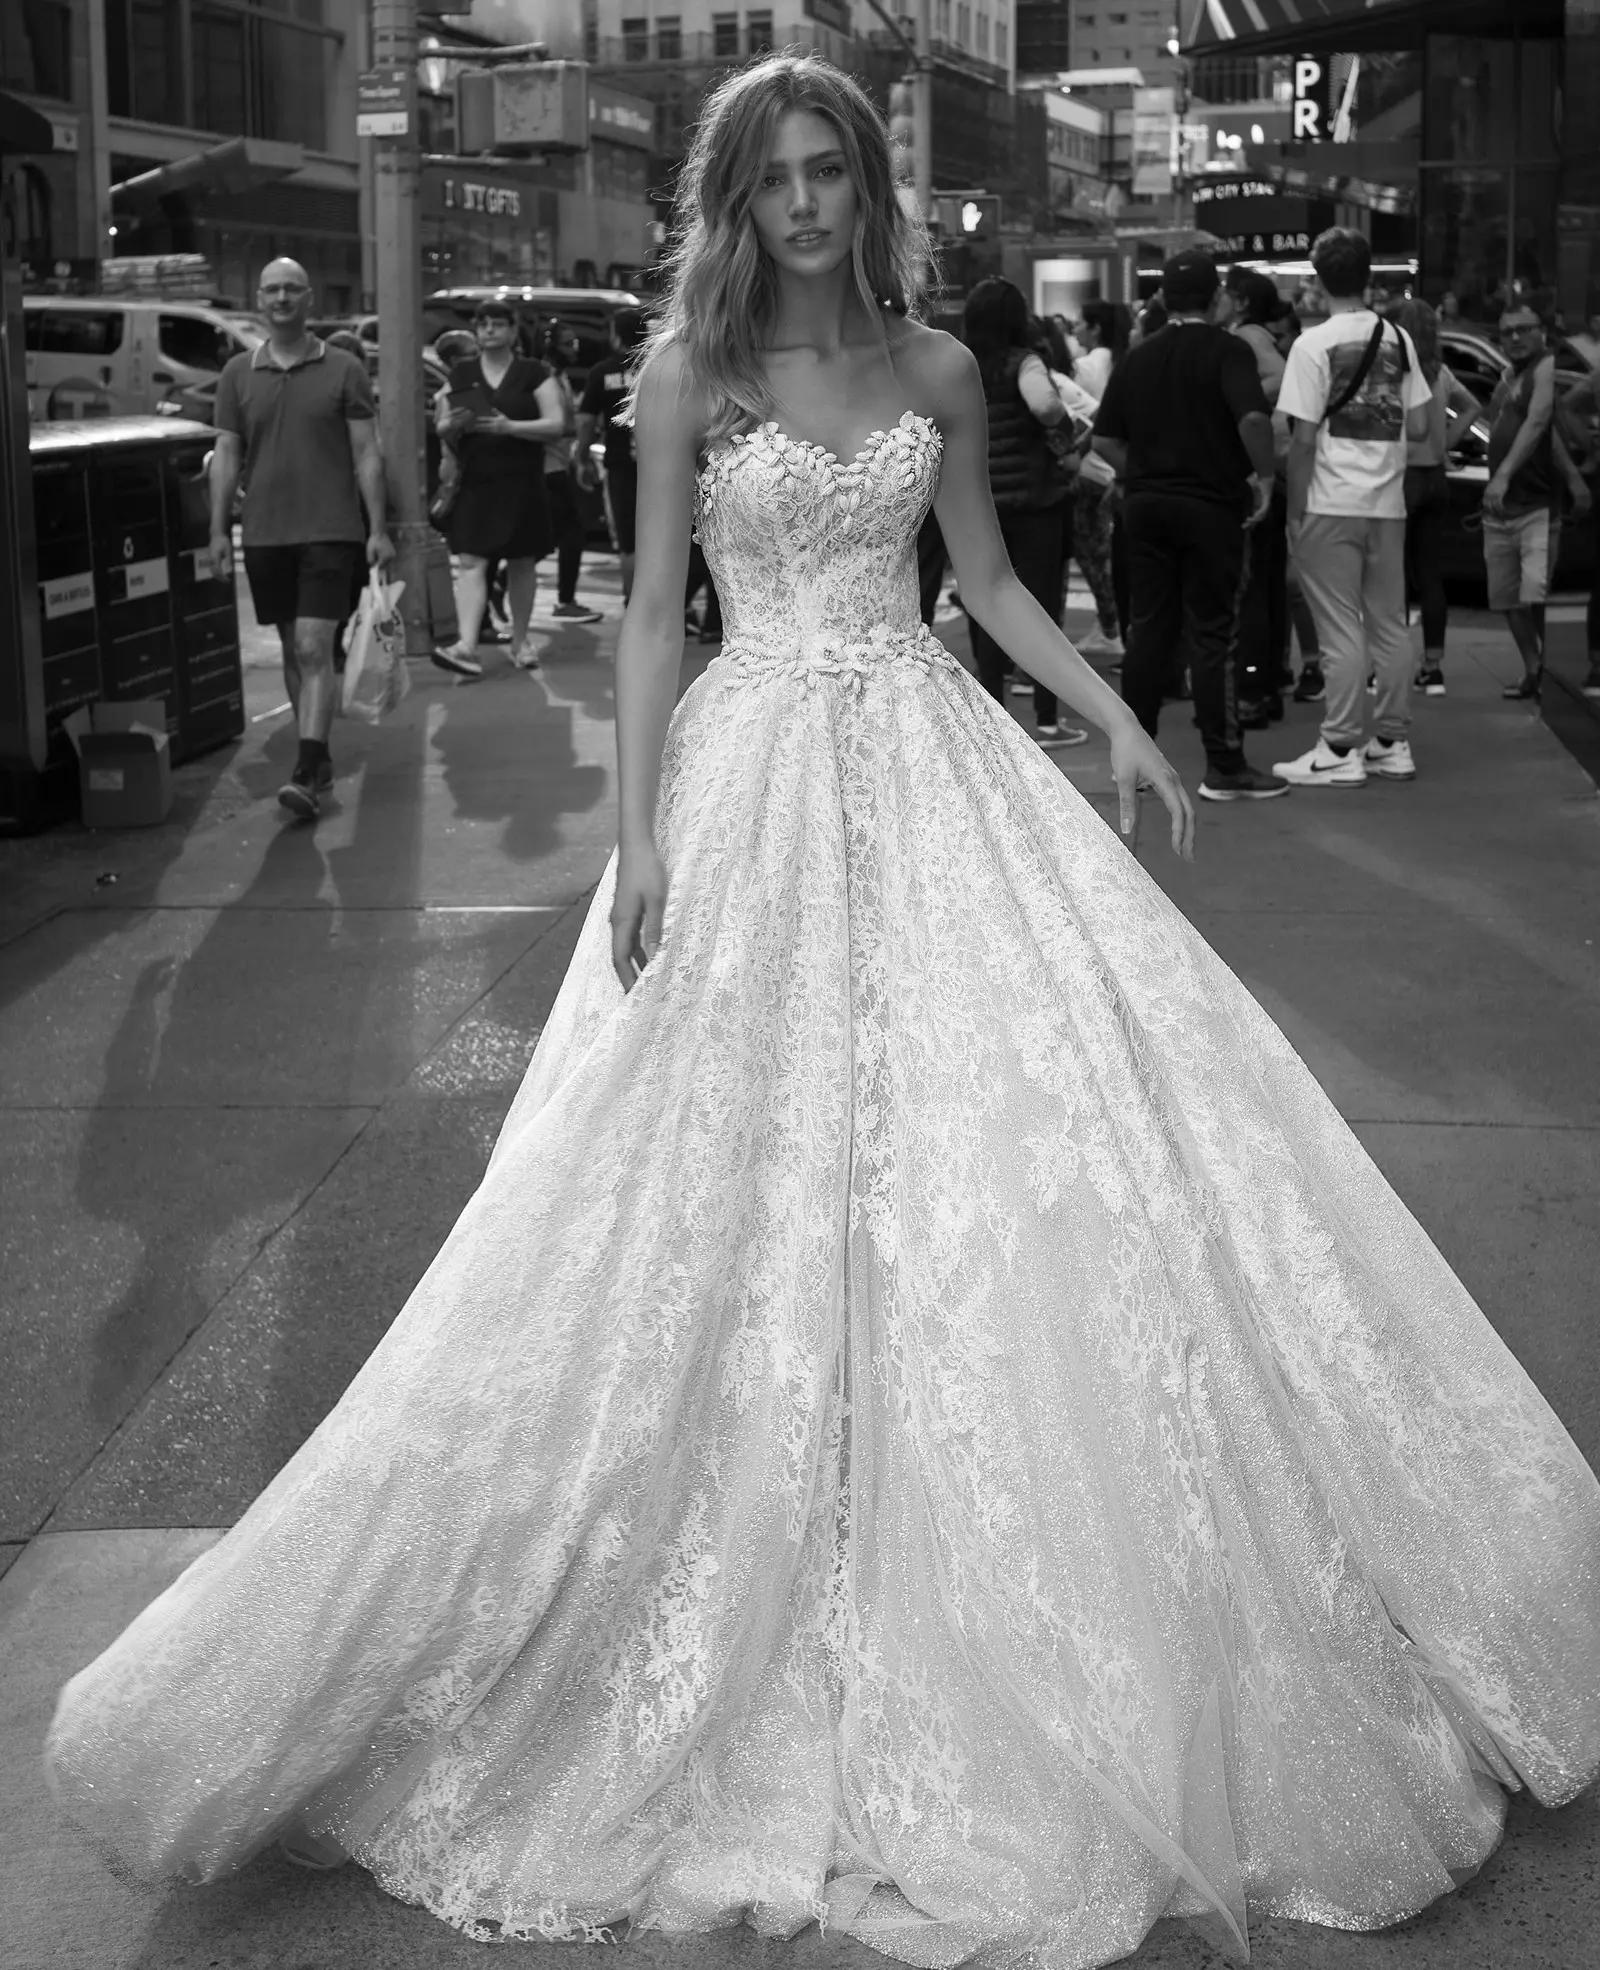 Model wearing a white ballgown Mobile image